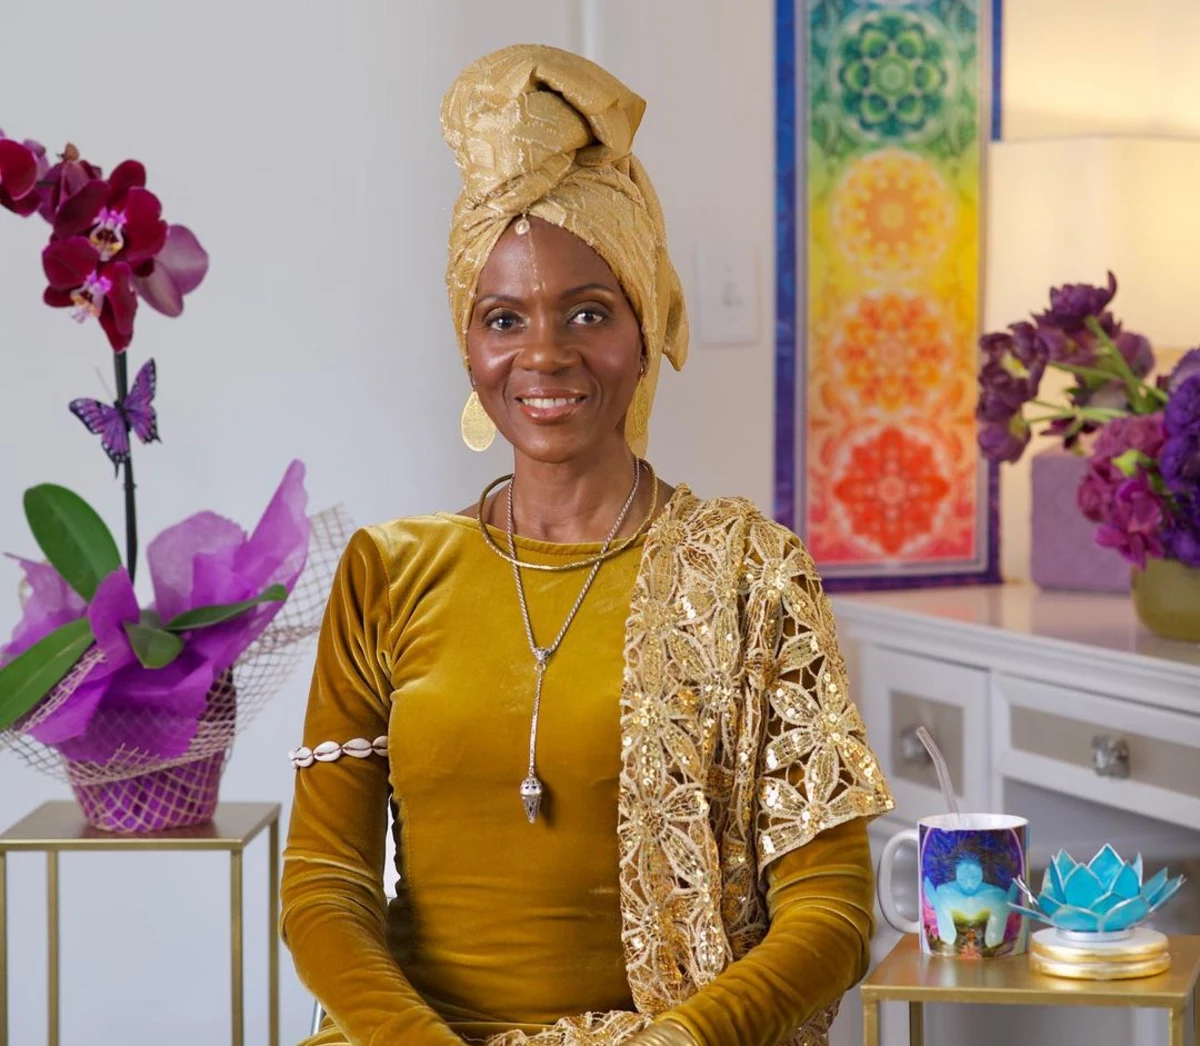 Queen Afua Wants to Help Align Your Beliefs With Your Practices